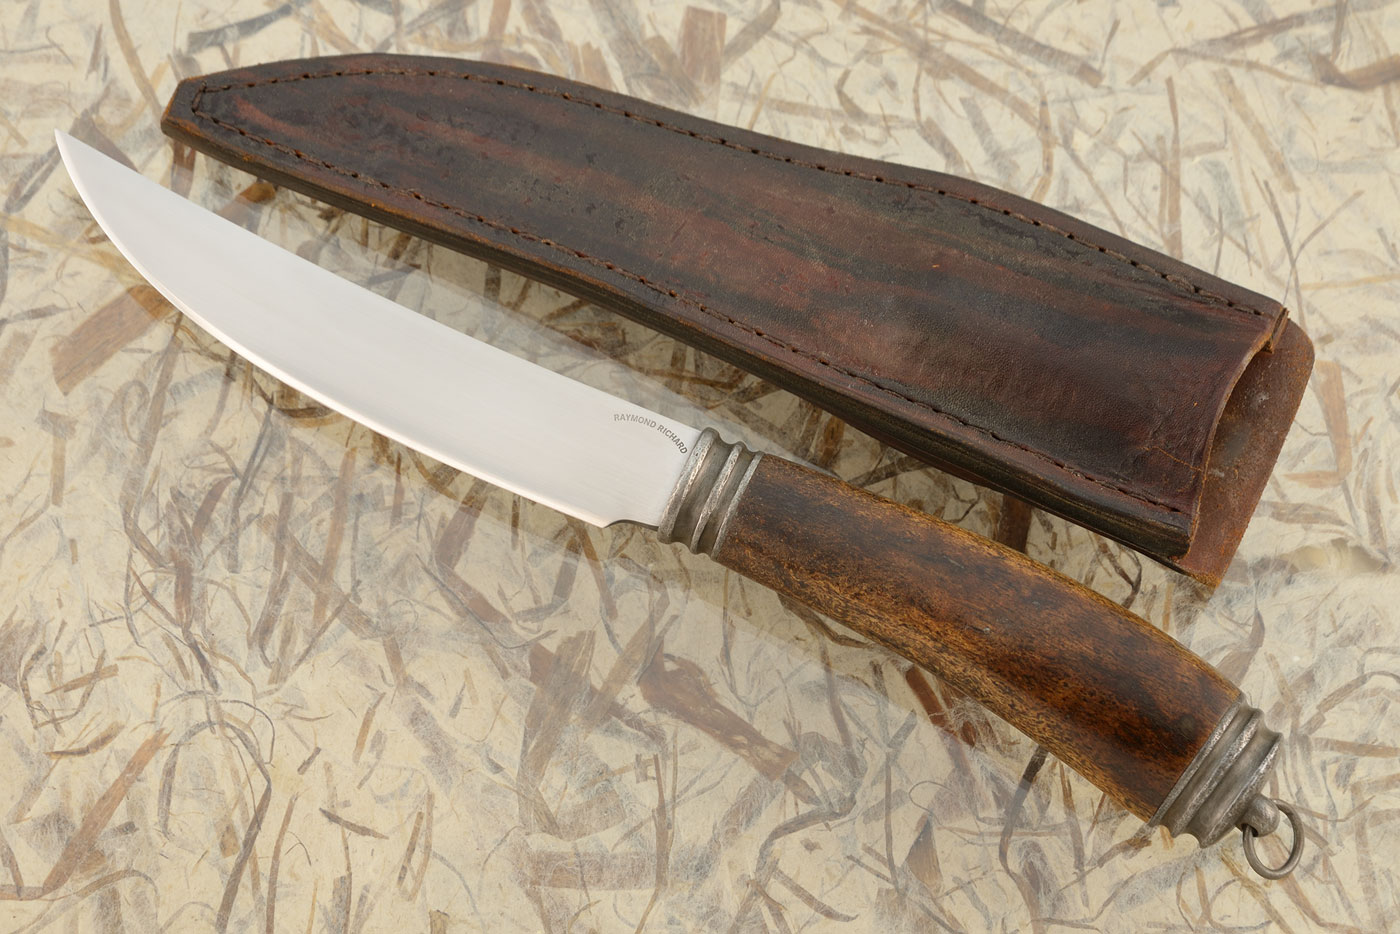 Frontier Camp Knife with Steller's Sea Cow and Wrought Iron